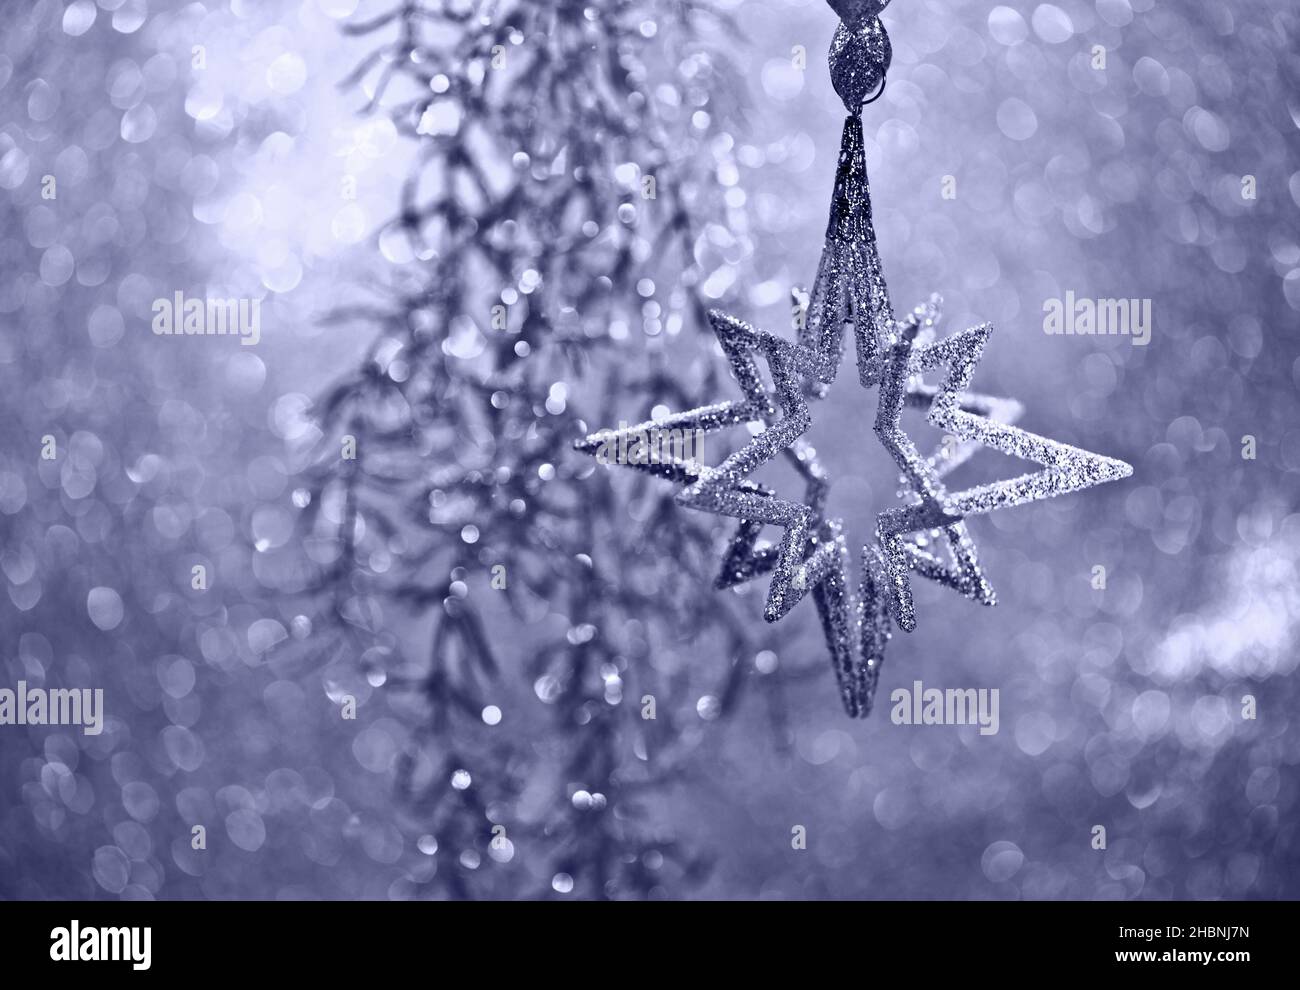 Christmas decoration silver star and lights on blurred violet background Stock Photo